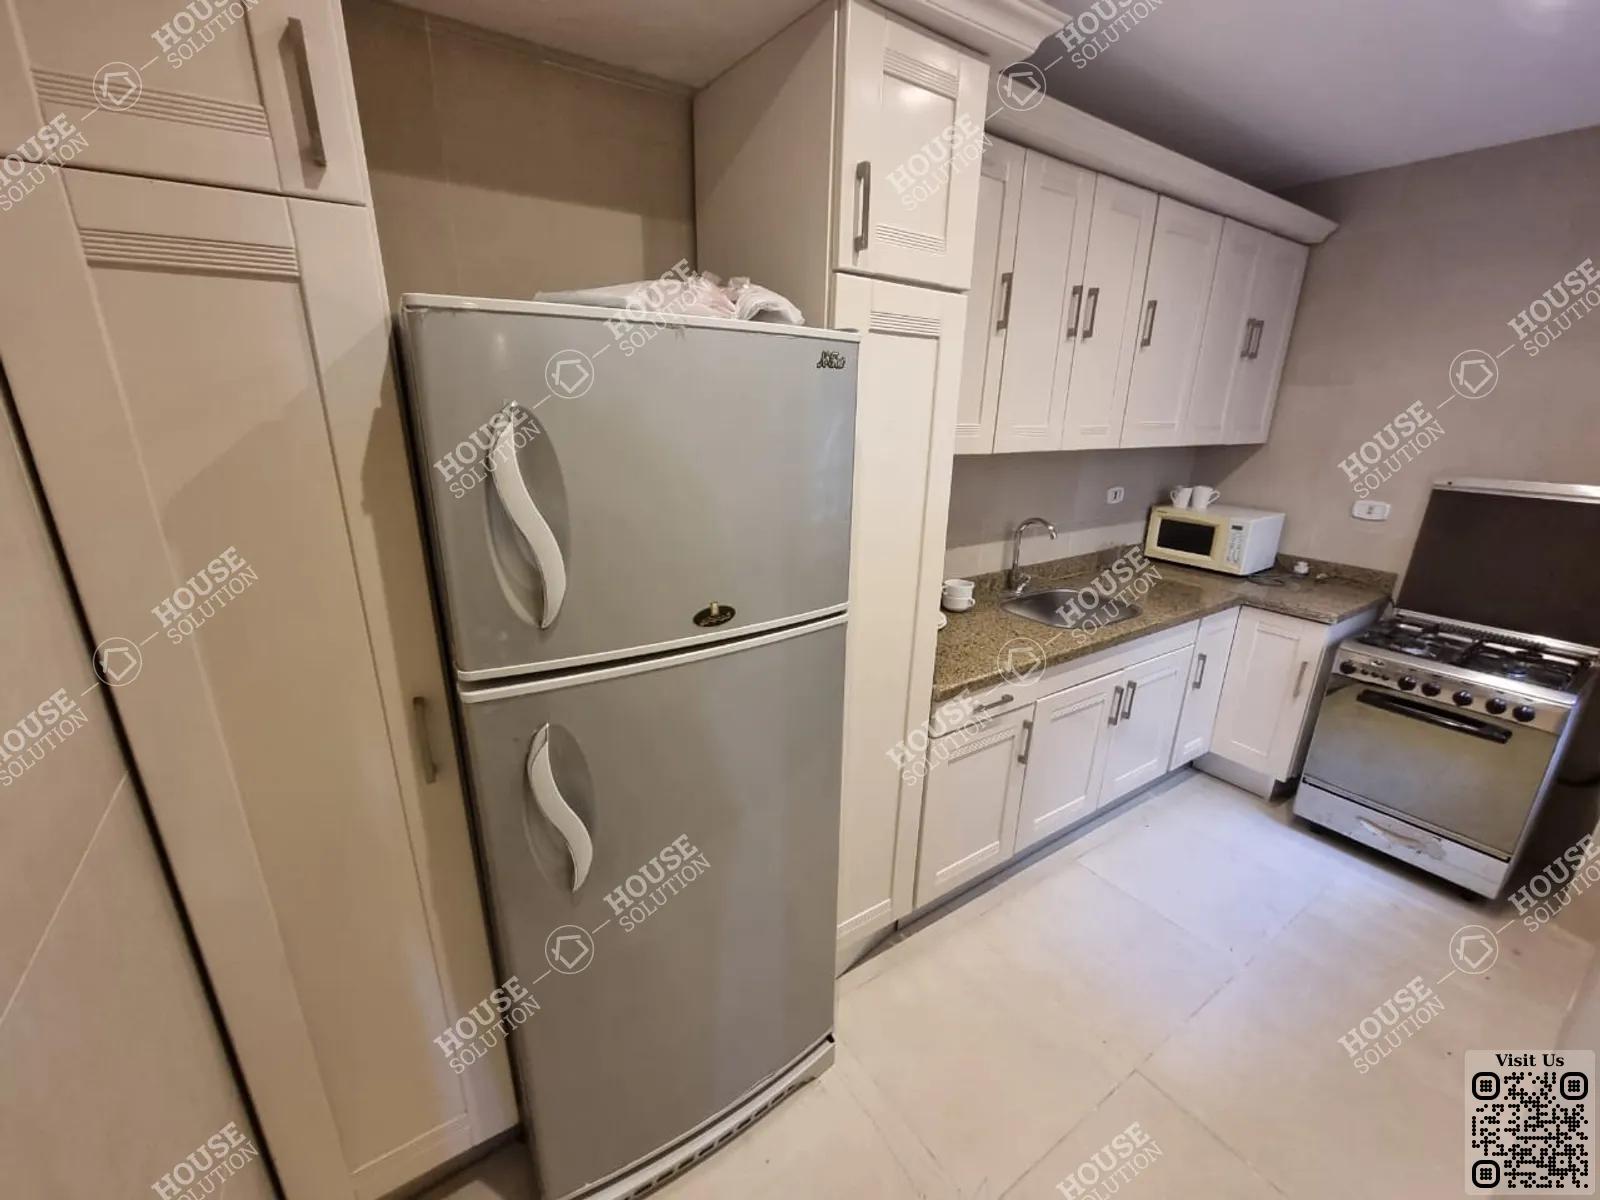 KITCHEN  @ Apartments For Rent In Maadi Maadi Degla Area: 125 m² consists of 2 Bedrooms 1 Bathrooms Modern furnished 5 stars #5805-1